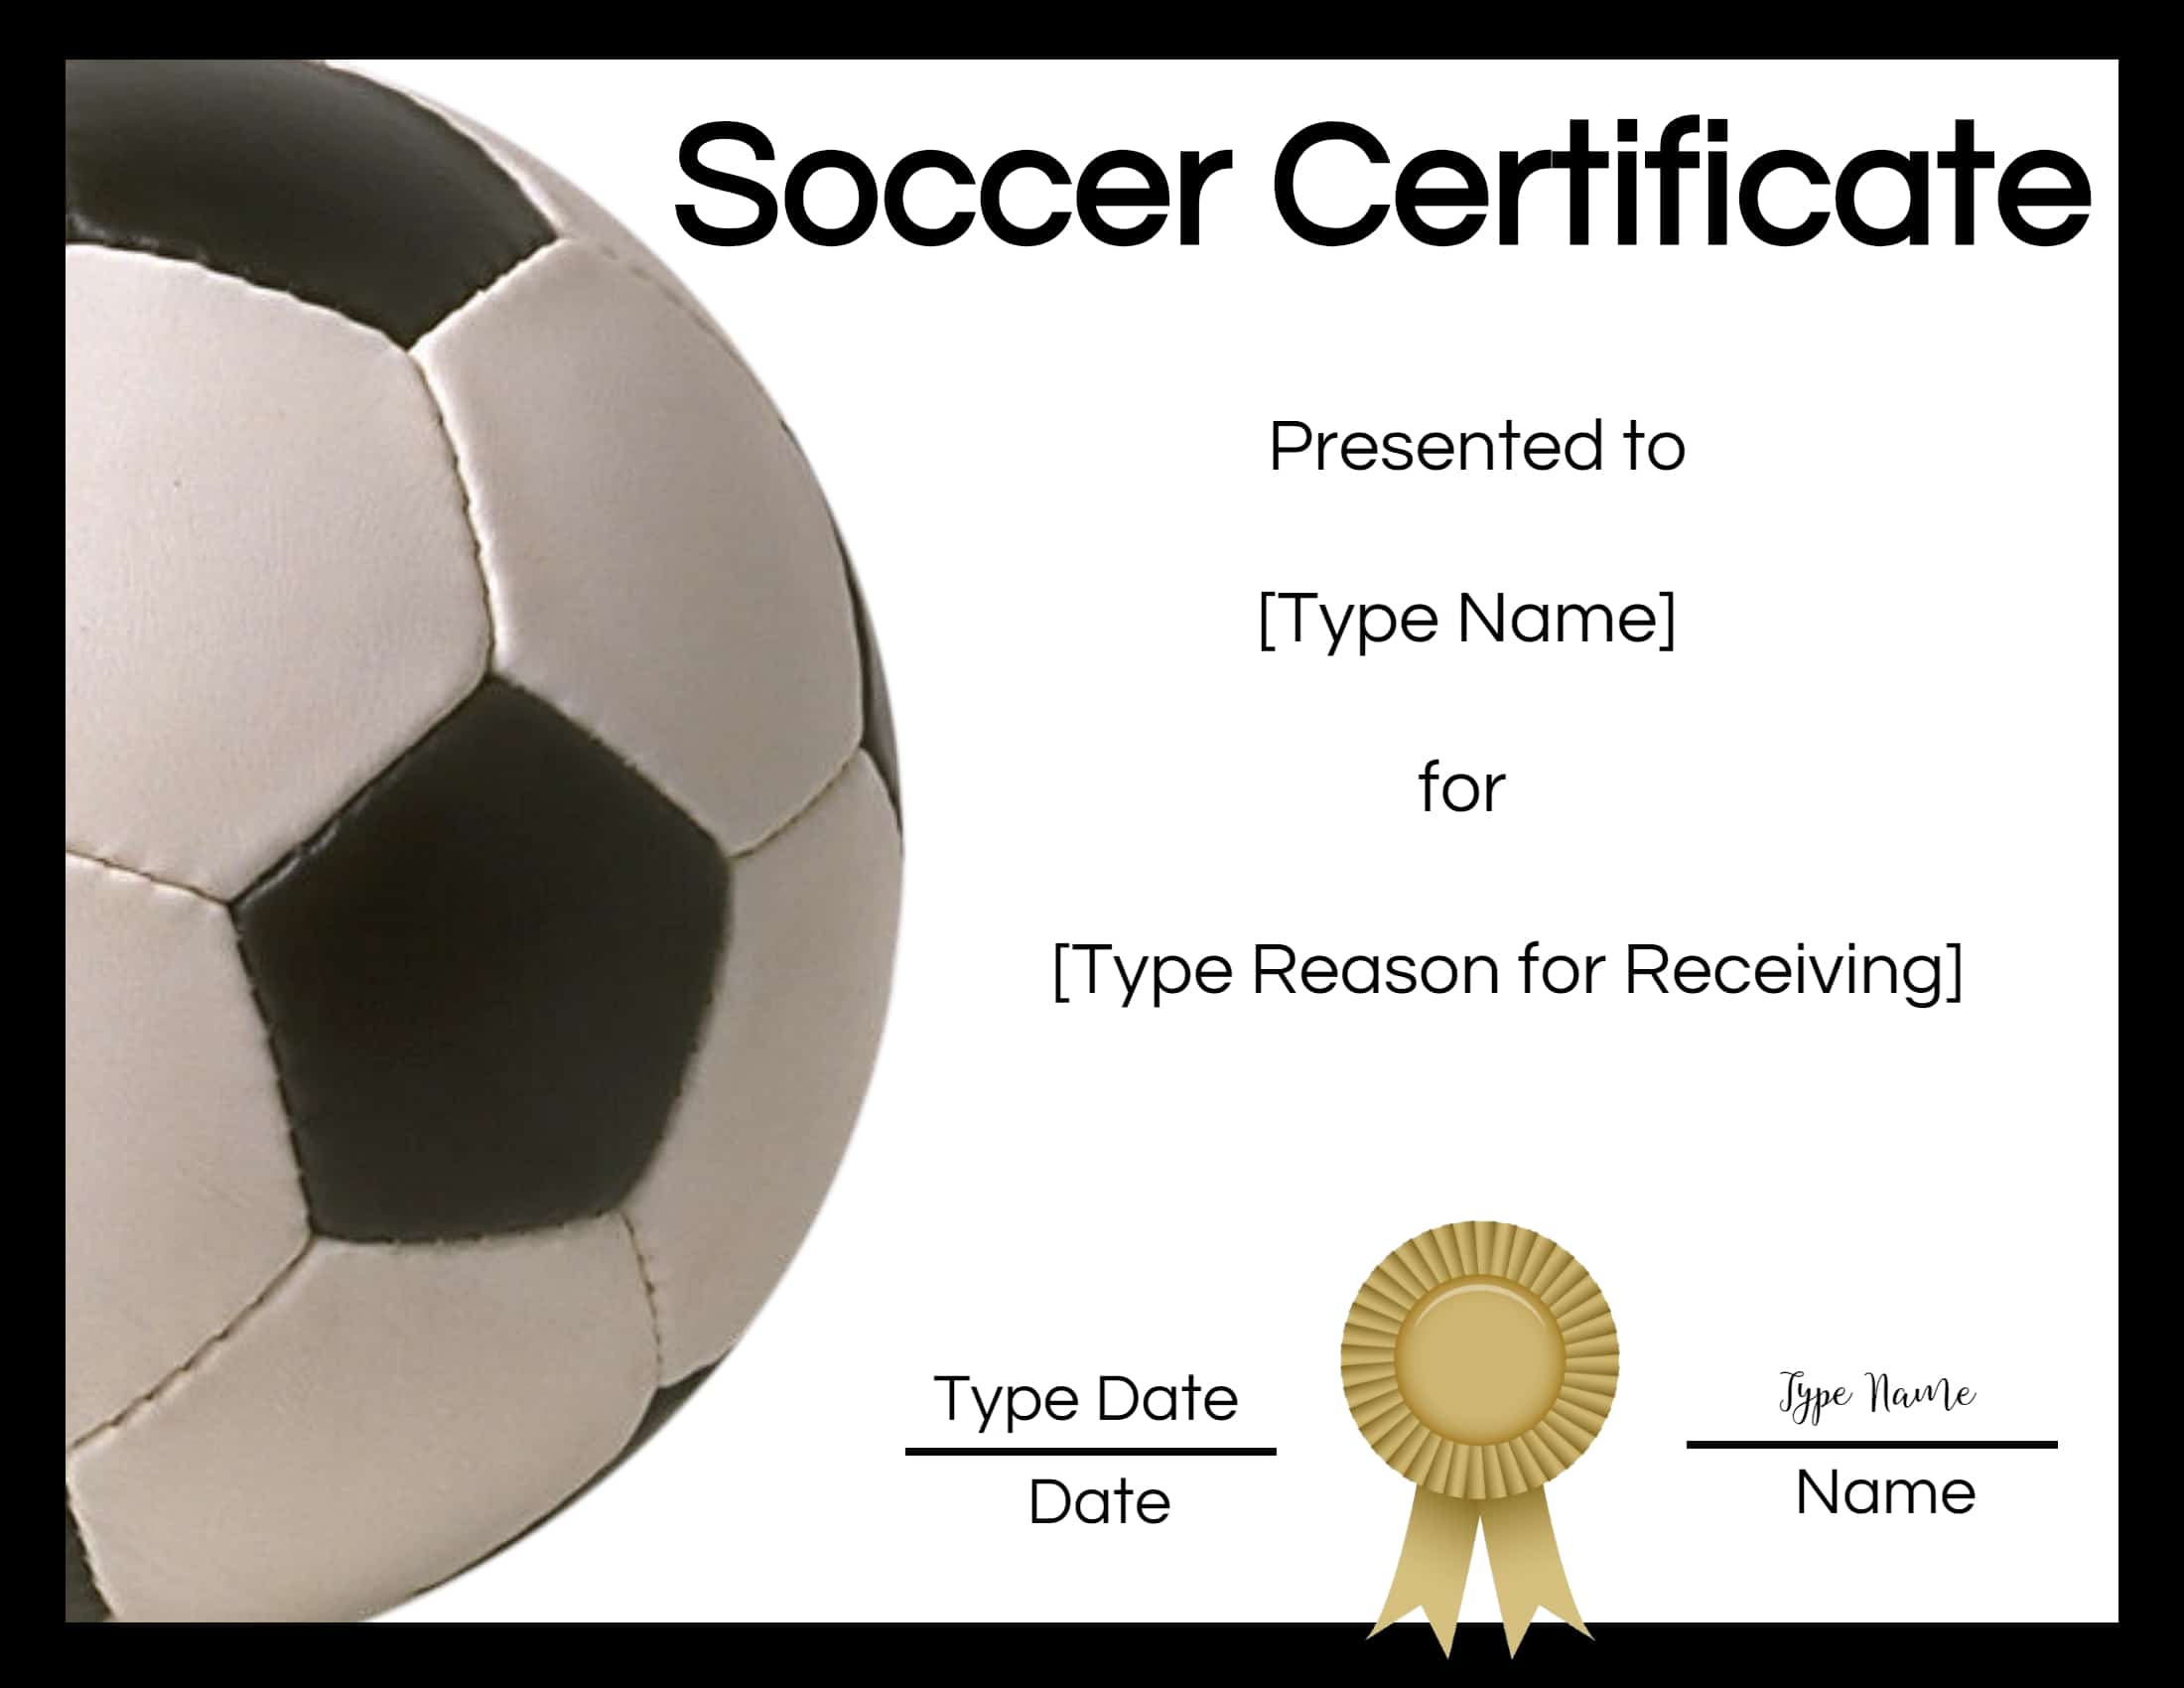 Free Soccer Certificate Maker  Edit Online and Print at Home Within Soccer Certificate Template